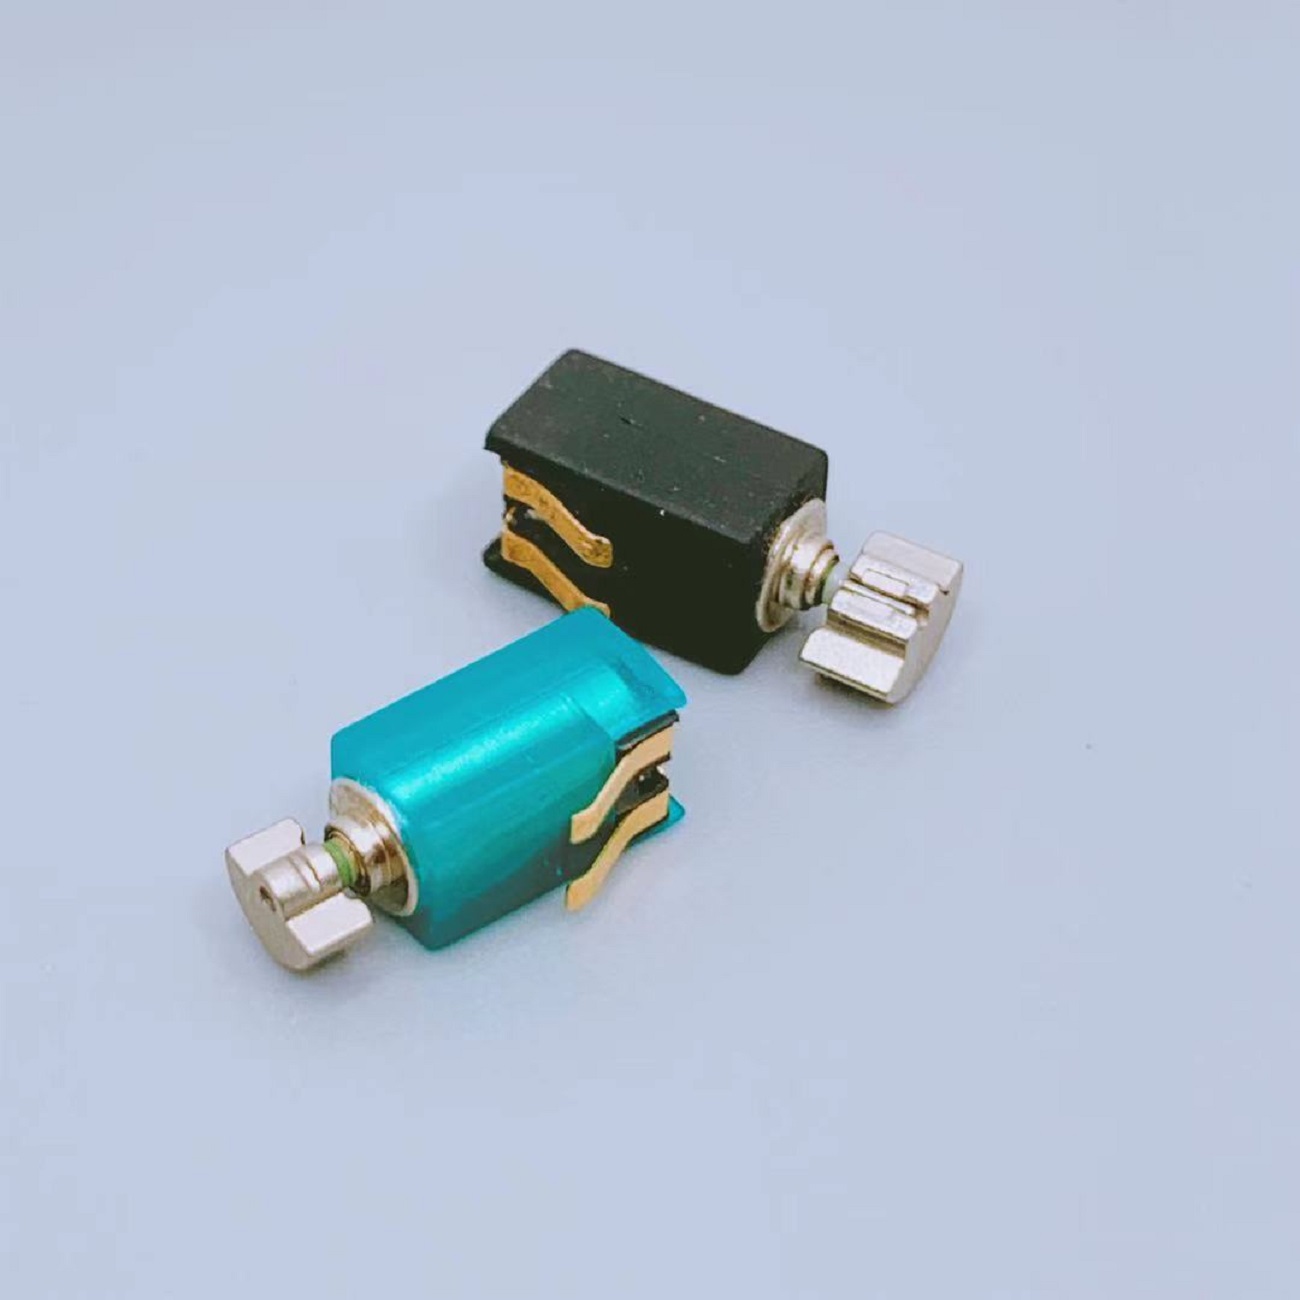 Factory best selling 42mm Dc Tuber Motor -
 Micro DC motors Manufacturers,Supplier,China | LEADER – Leader Microelectronics